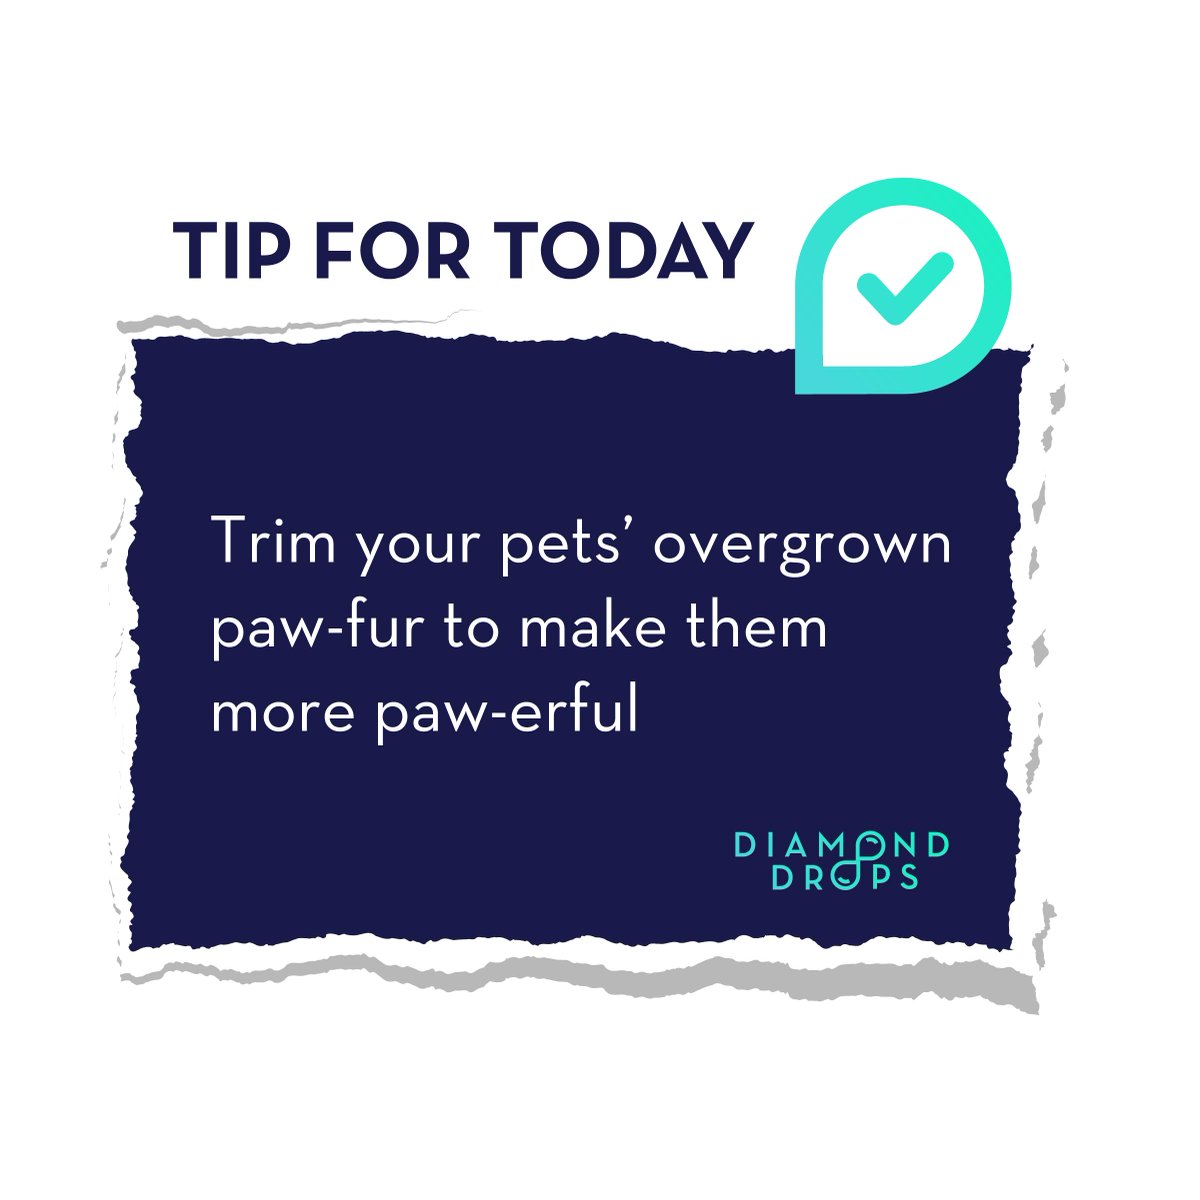 Pets have a lot of fur that grows on the top of their paws, between their toes, and even underneath on paw's pads.

Slush and dirt can really get packed in there tight and harden them making them spread germs.

#diamonddrops #dogslove #petpaws #puppylife #petcare #cleanpets